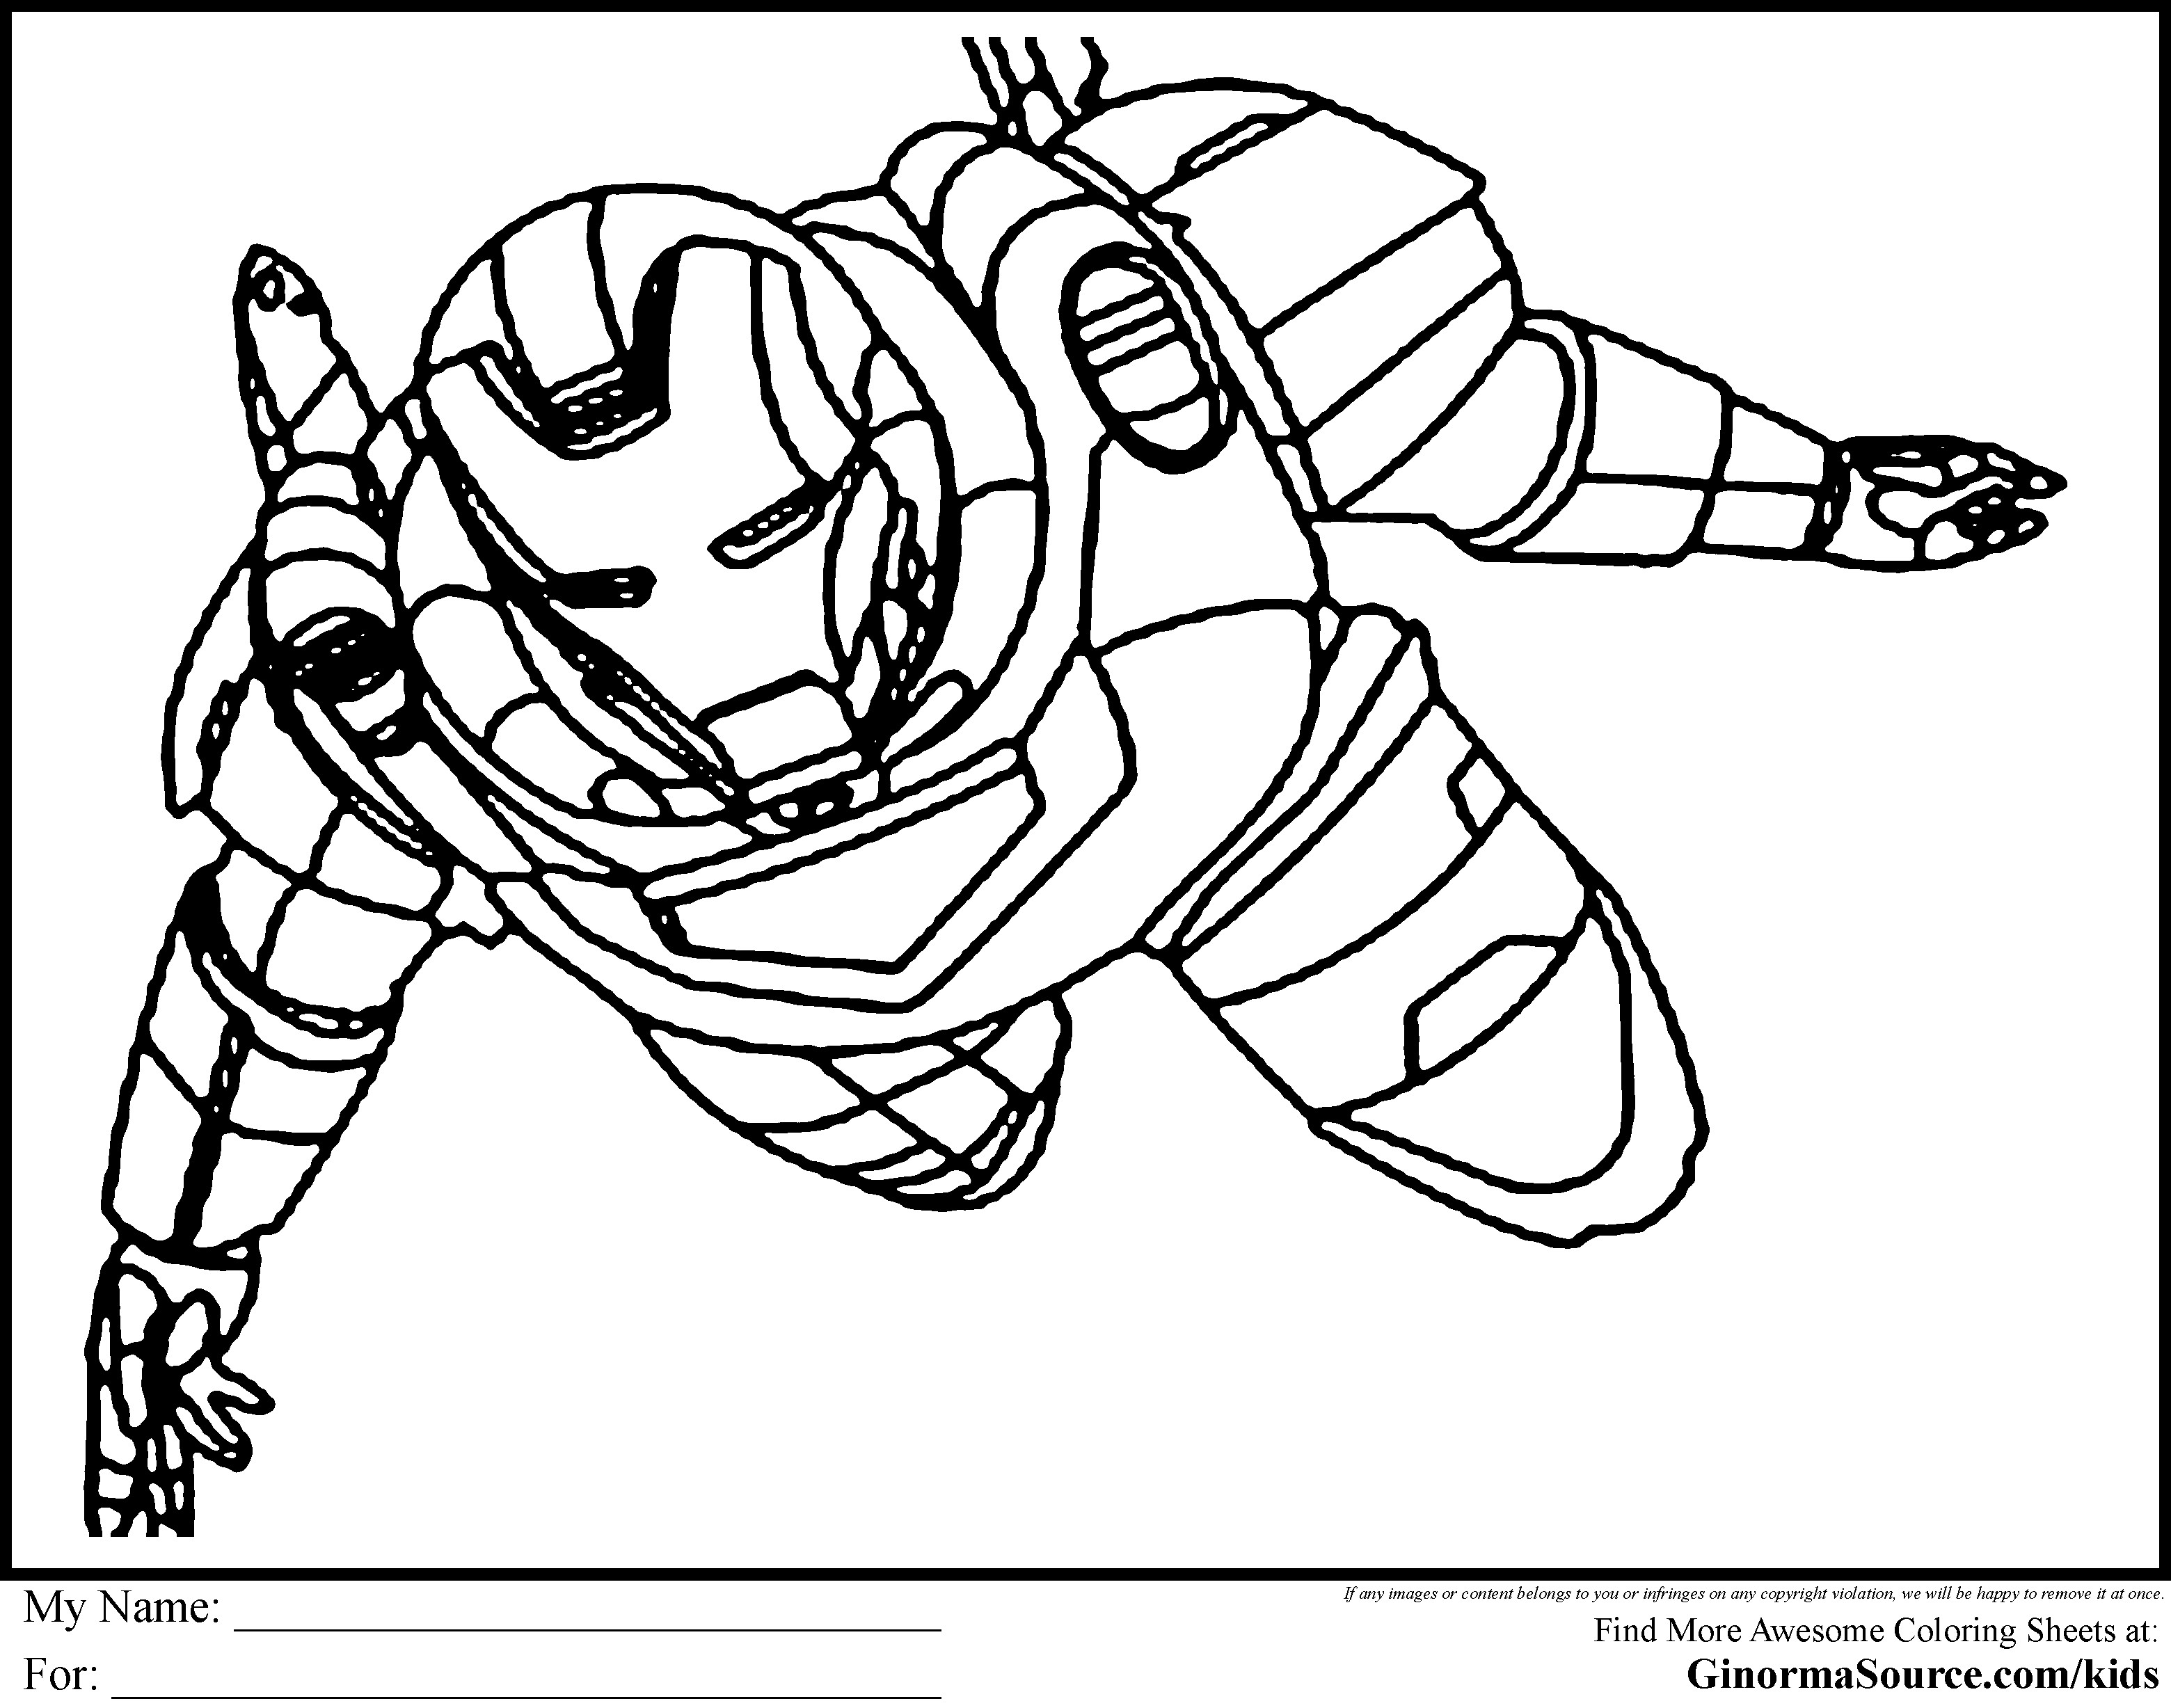 Superhero Boys Coloring Pages
 Superhero Coloring Pages Pdf Coloring Home